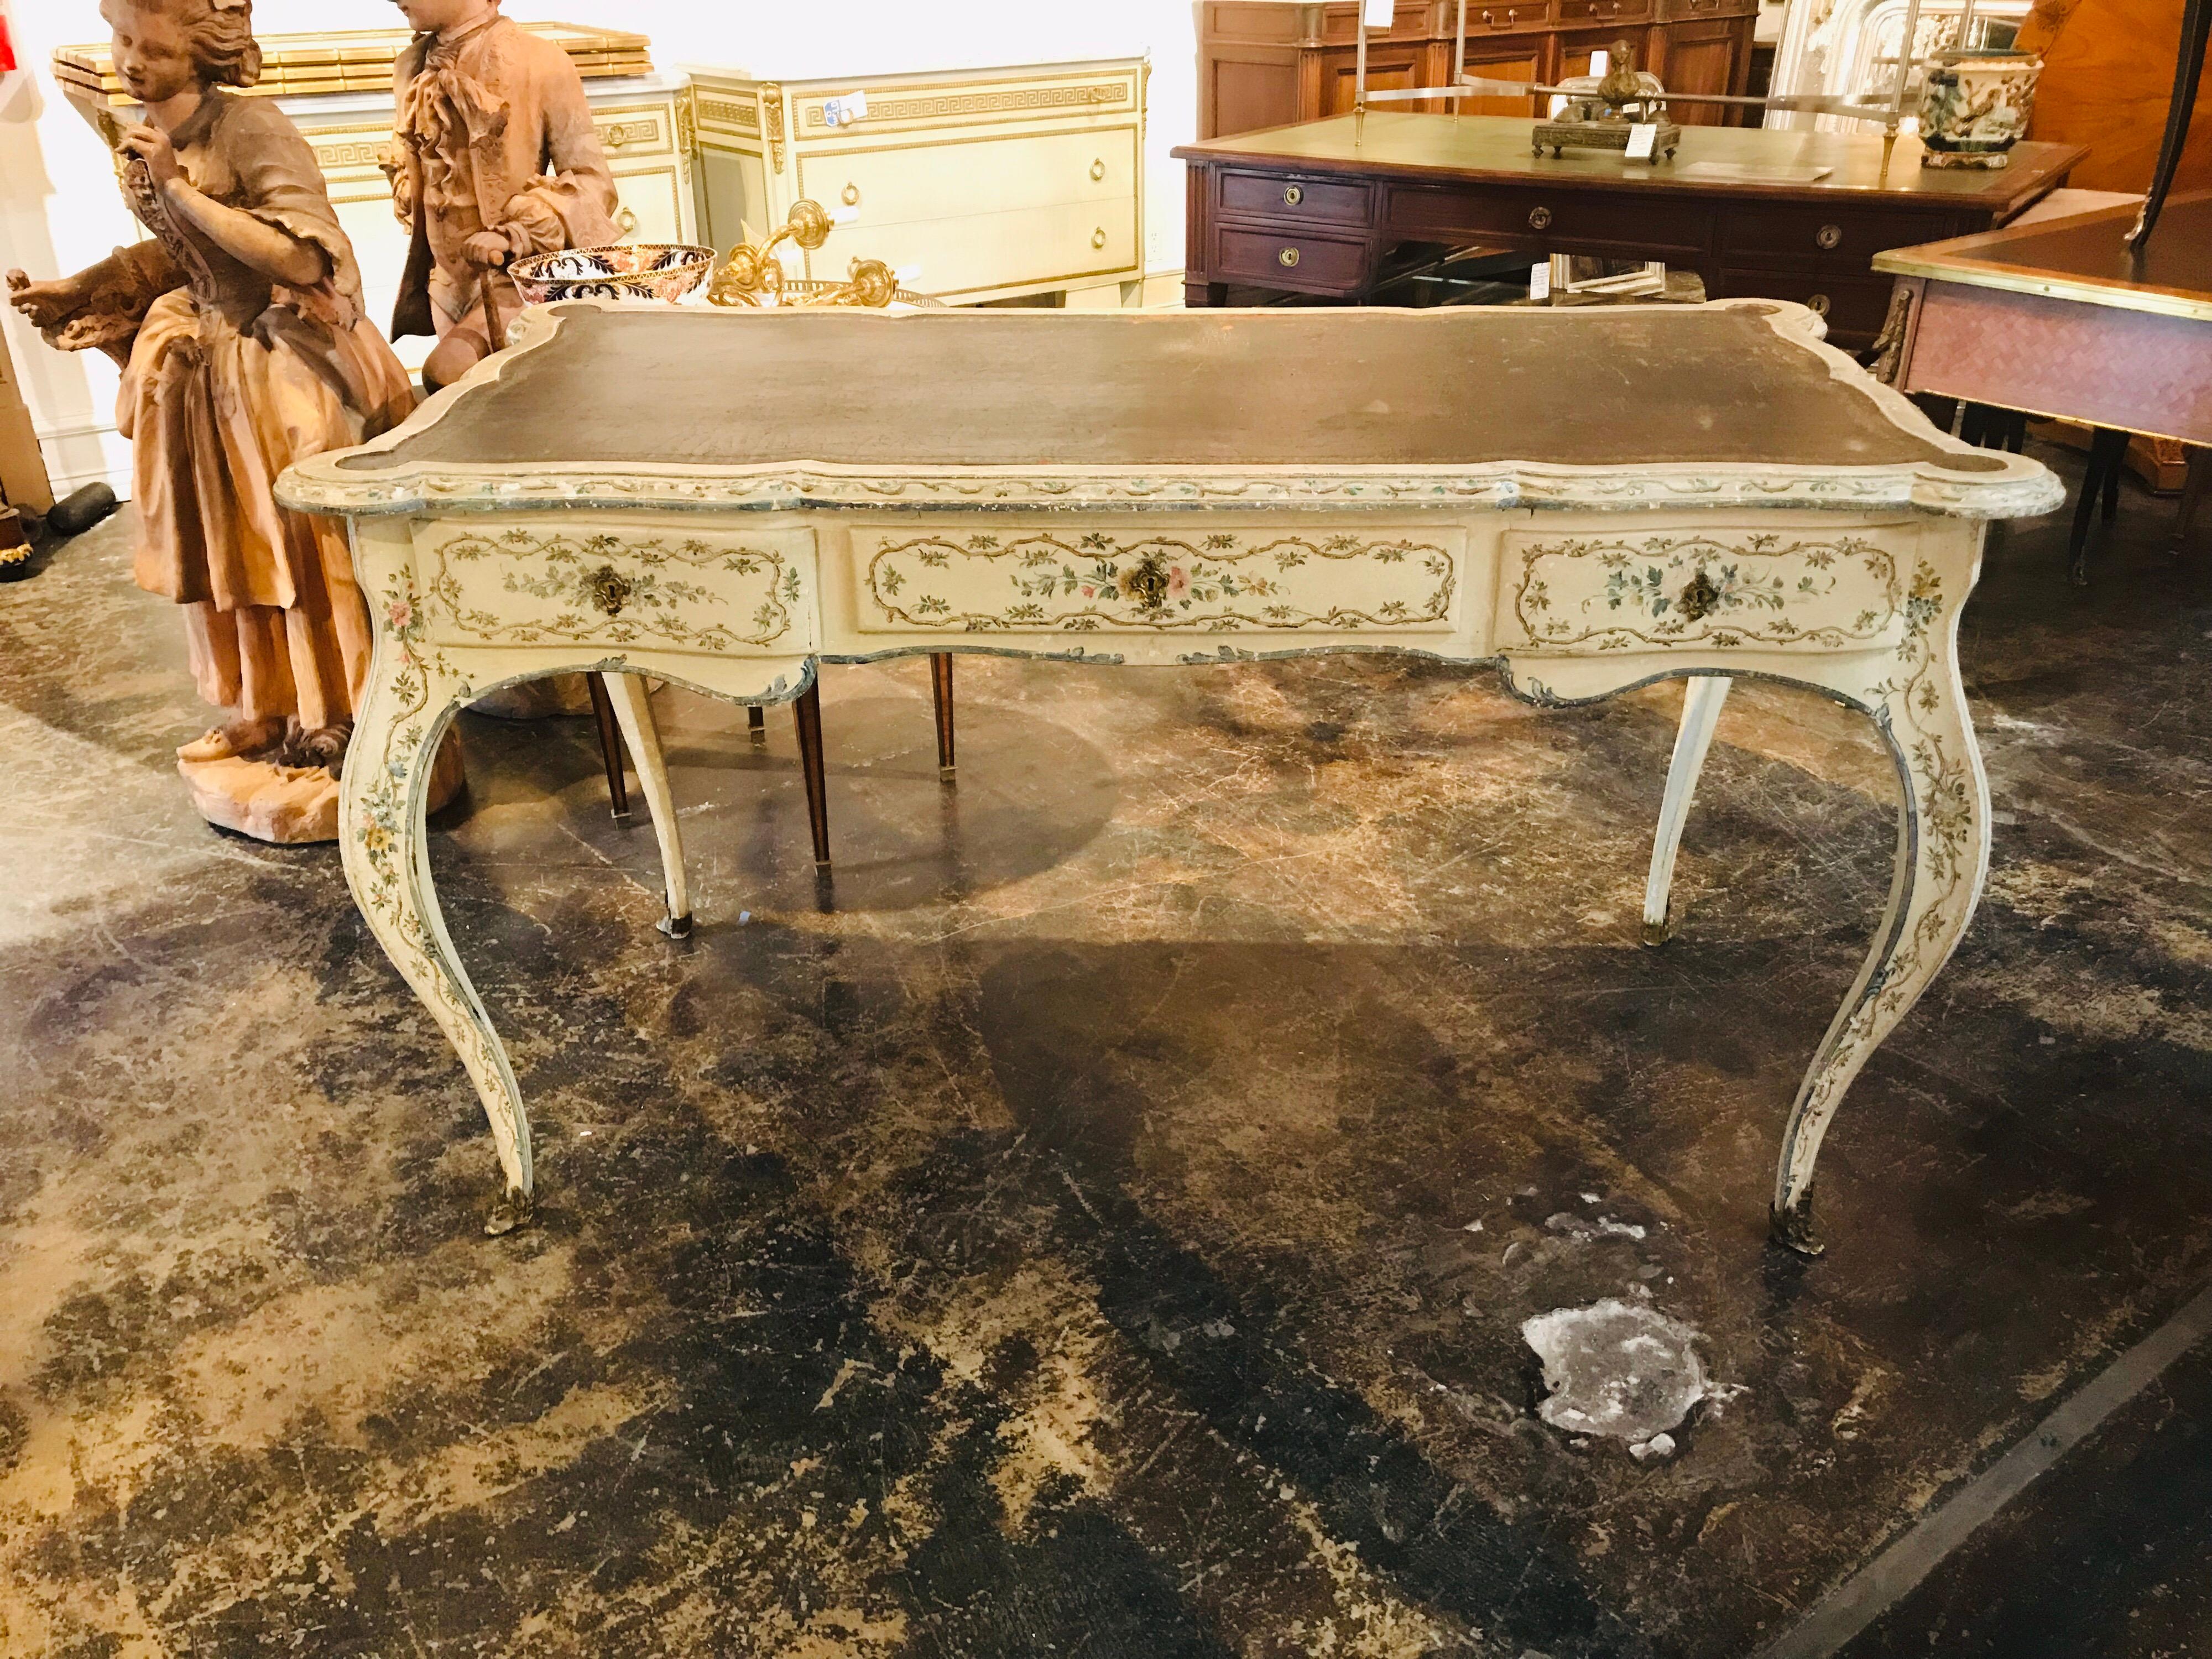 Beautiful Italian painted desk with original leather top and bronze hardware. Nicely aged patina that shows normal signs of age and use. Hard to find large scale with plenty of leg room below. The table could also serve as a center table or a